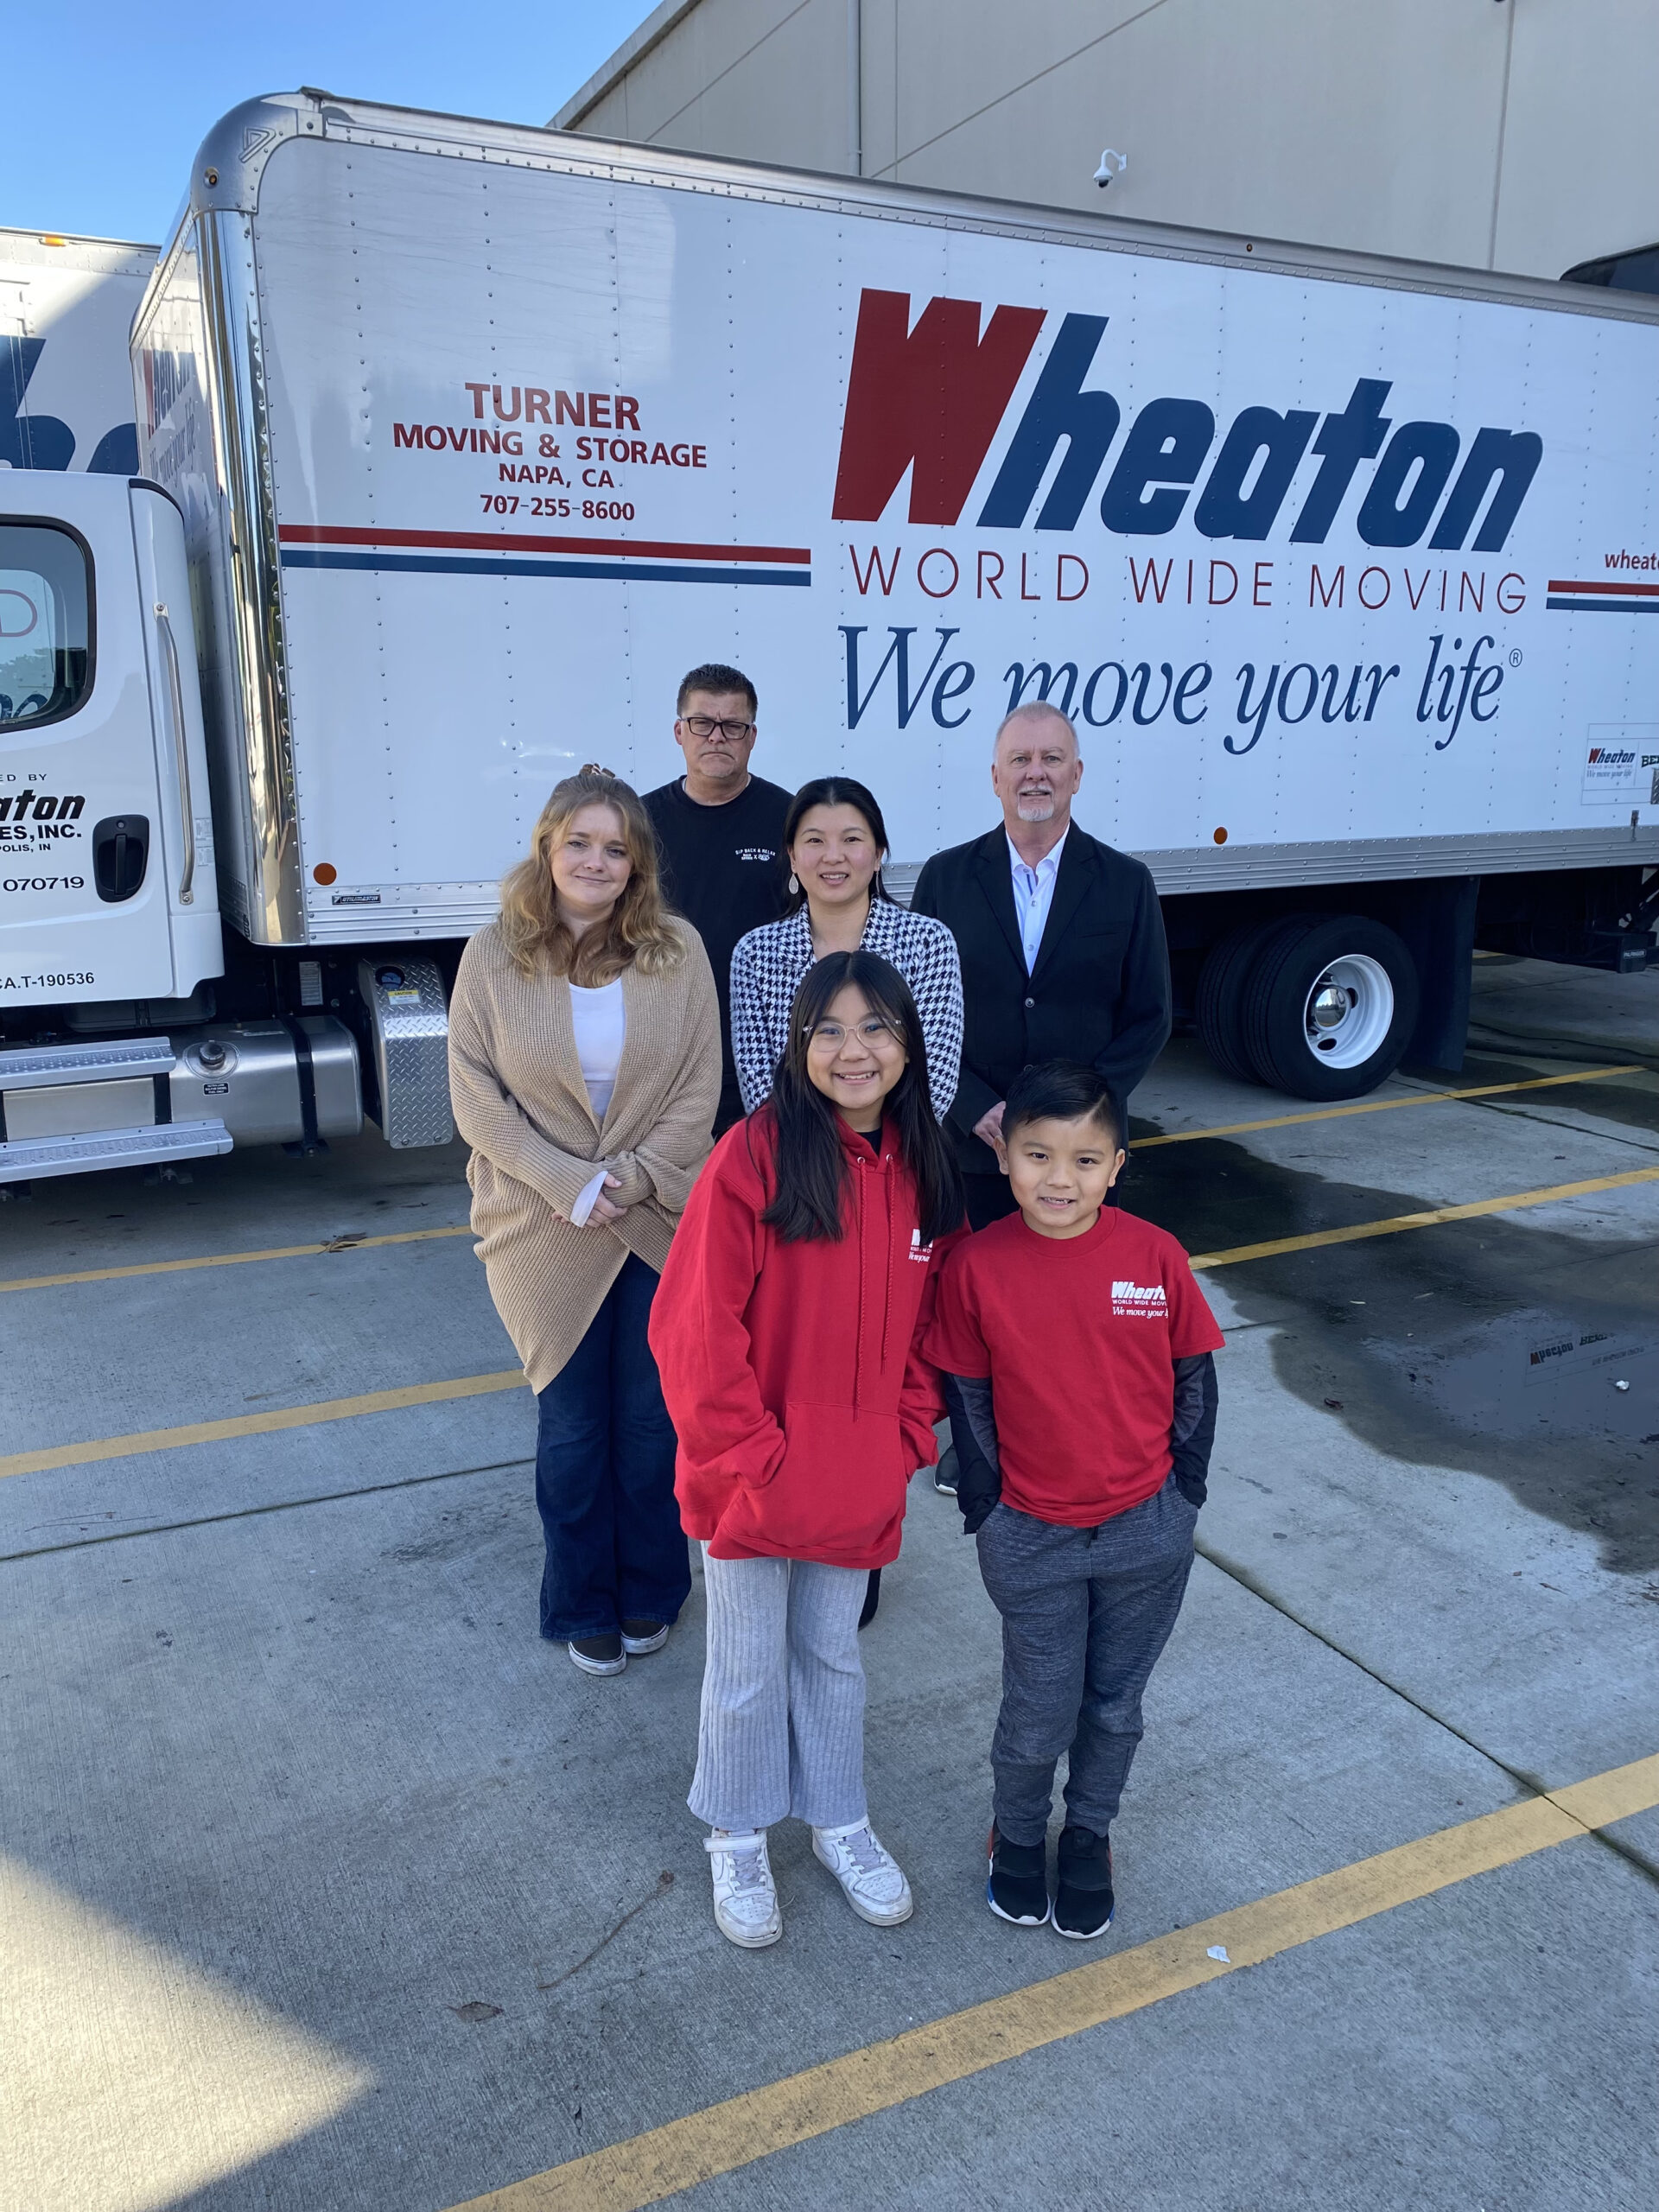 Family-run Turner Moving & Storage is the 2022 Wheaton Agent of the Year